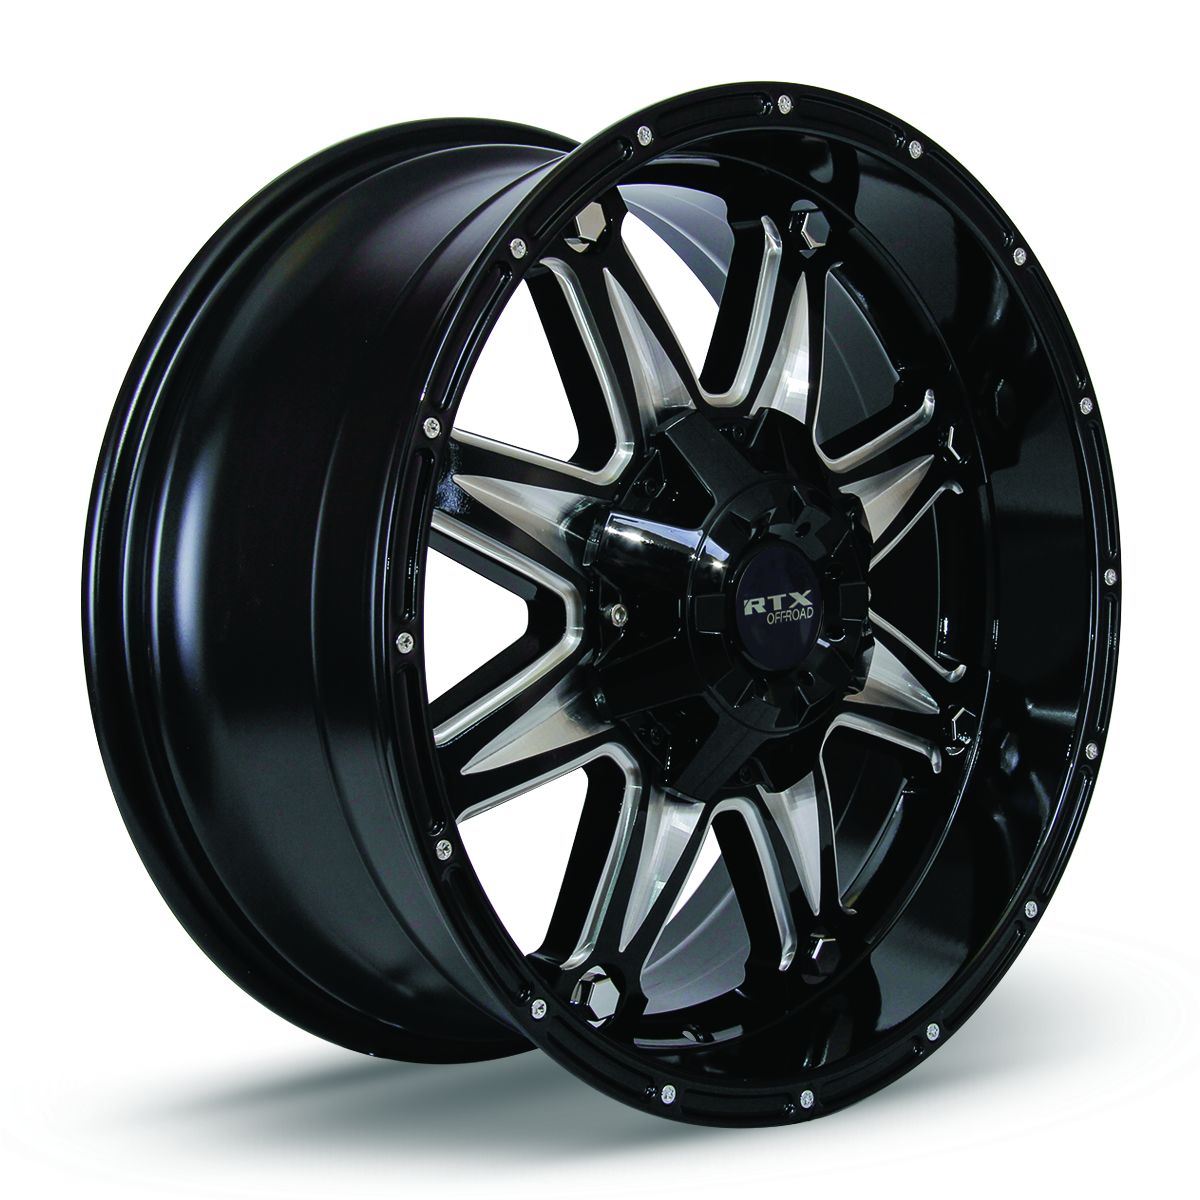 Spine • Black with Milled Spokes • 18x9 5x127/139.7 ET15 CB78.1